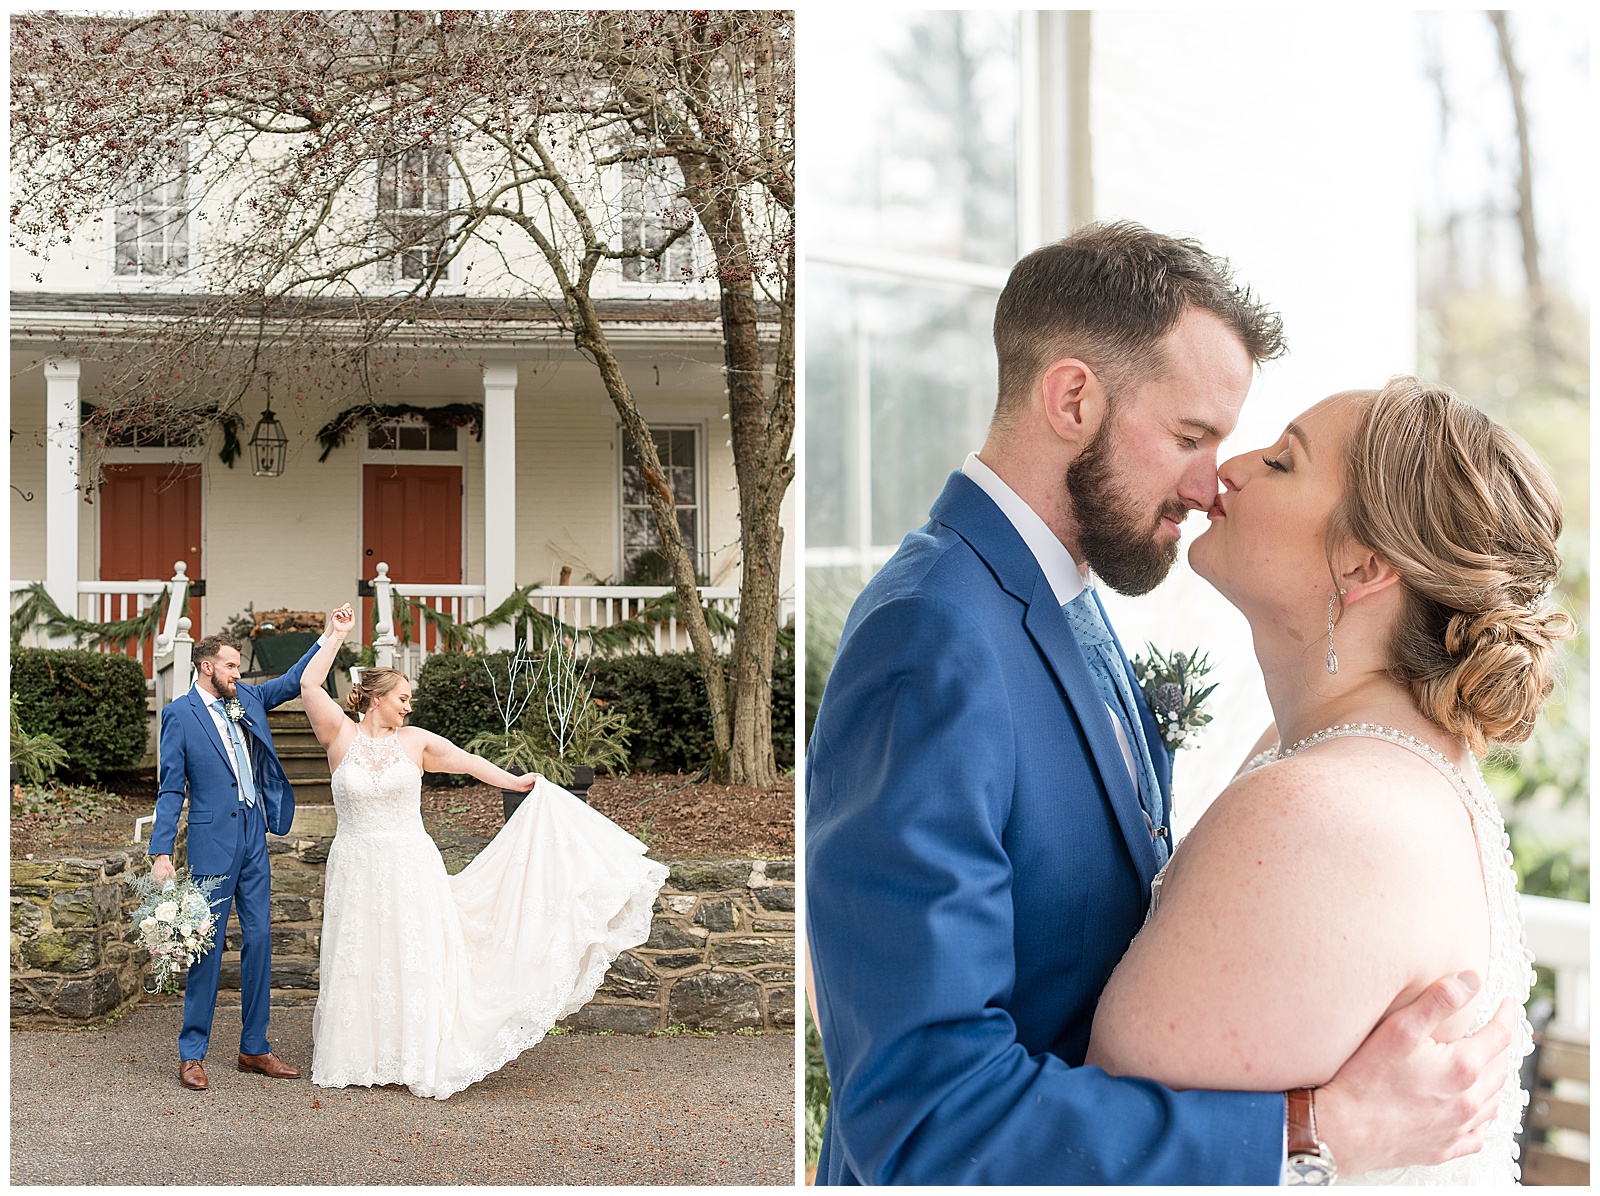 couple kiss and bride displays her bridal gown train outside white home